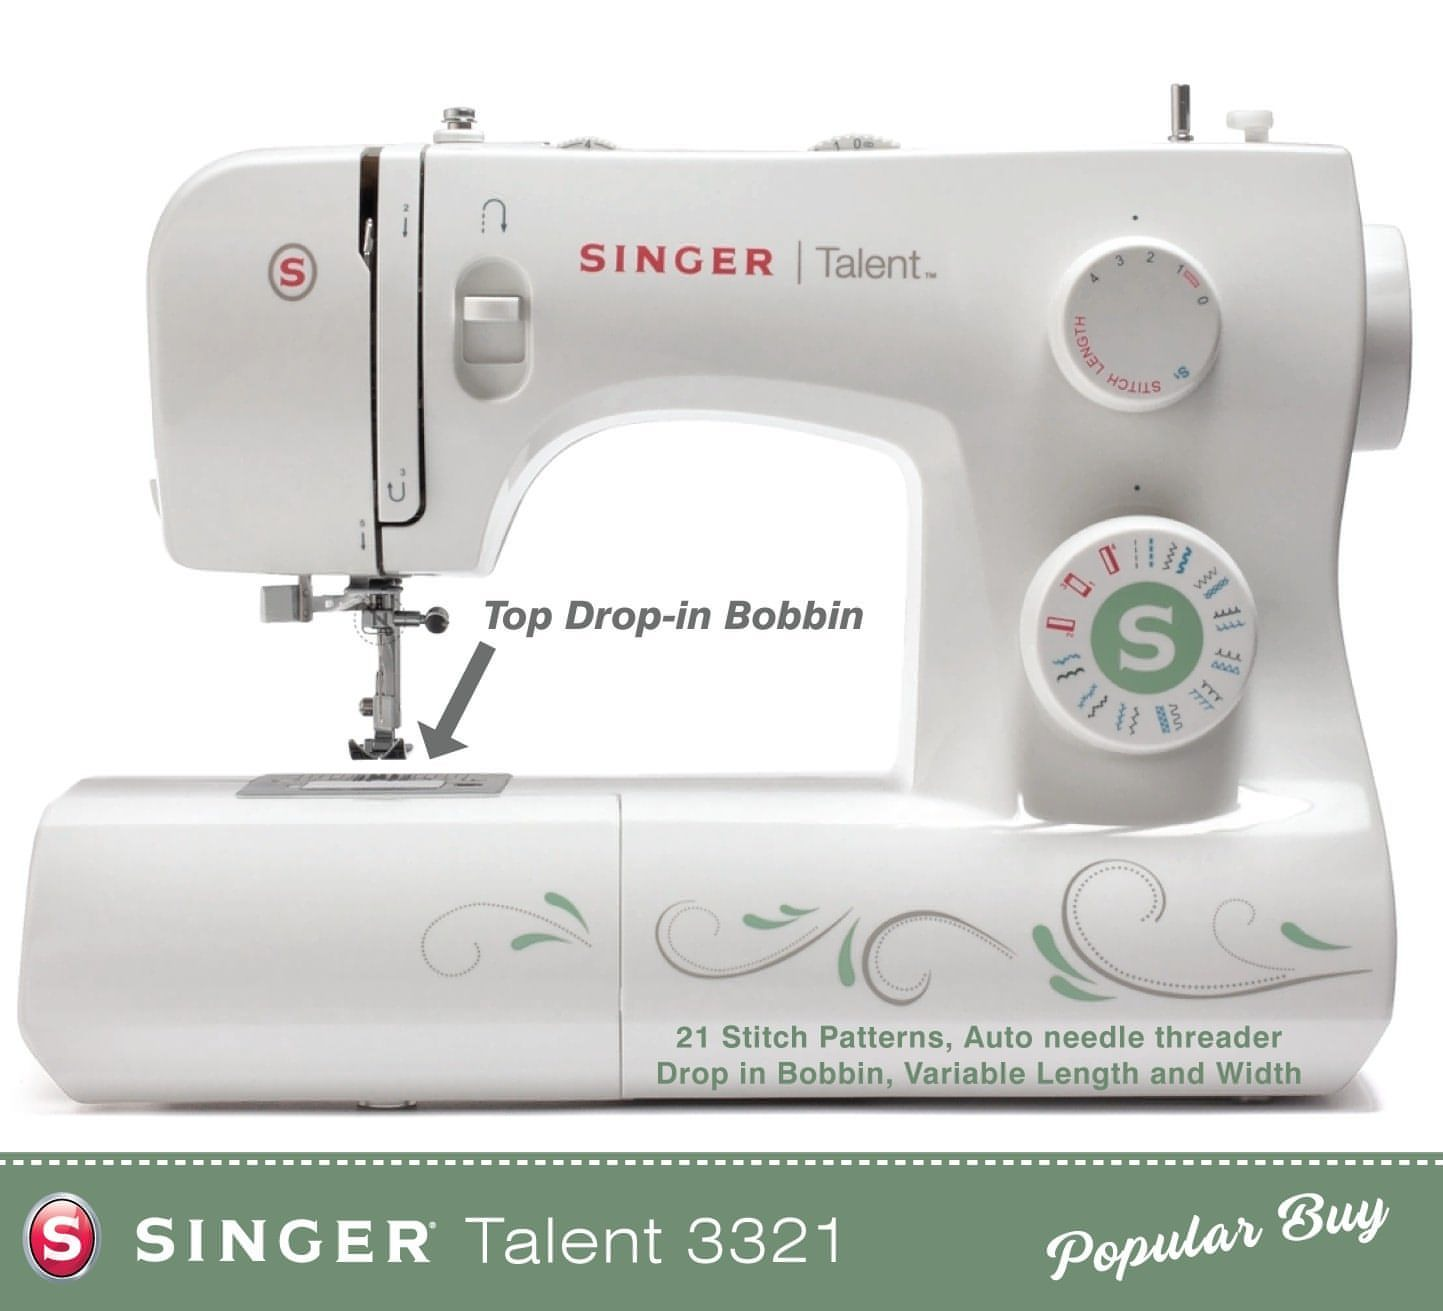 Singer Talent 3321 Sewing Machine with Deluxe Bundle